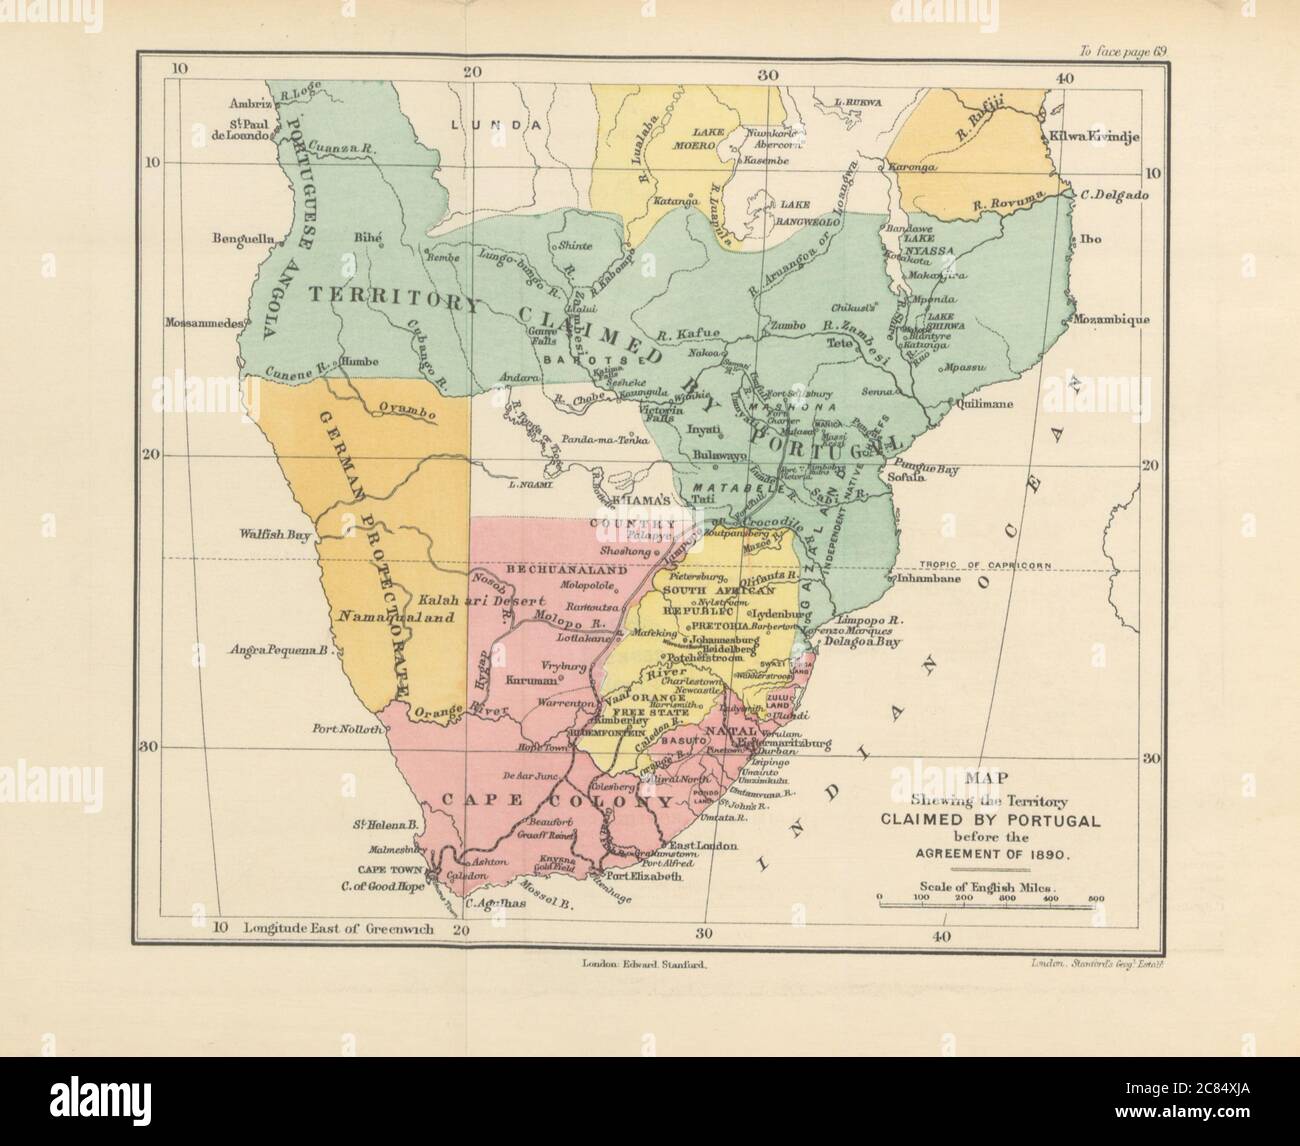 South Africa from Arab domination to British rule ... With maps.jpg -  2C84XJA Stock Photo - Alamy